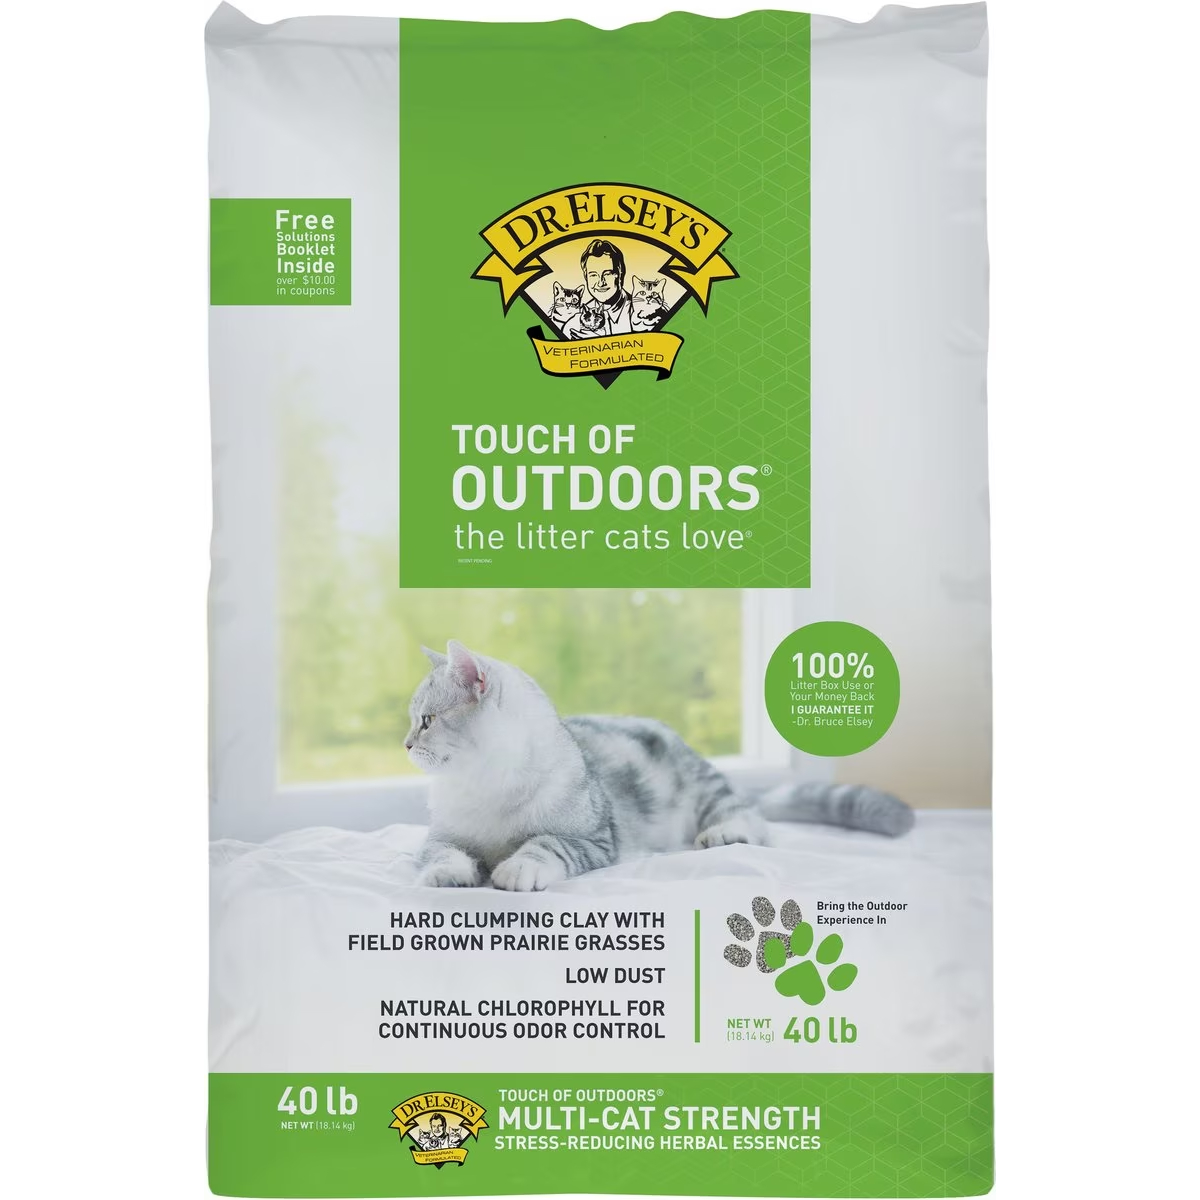 Dr. Elsey’s Precious Cat Touch of Outdoors Unscented Clumping Clay & Prairie Grasses Litter